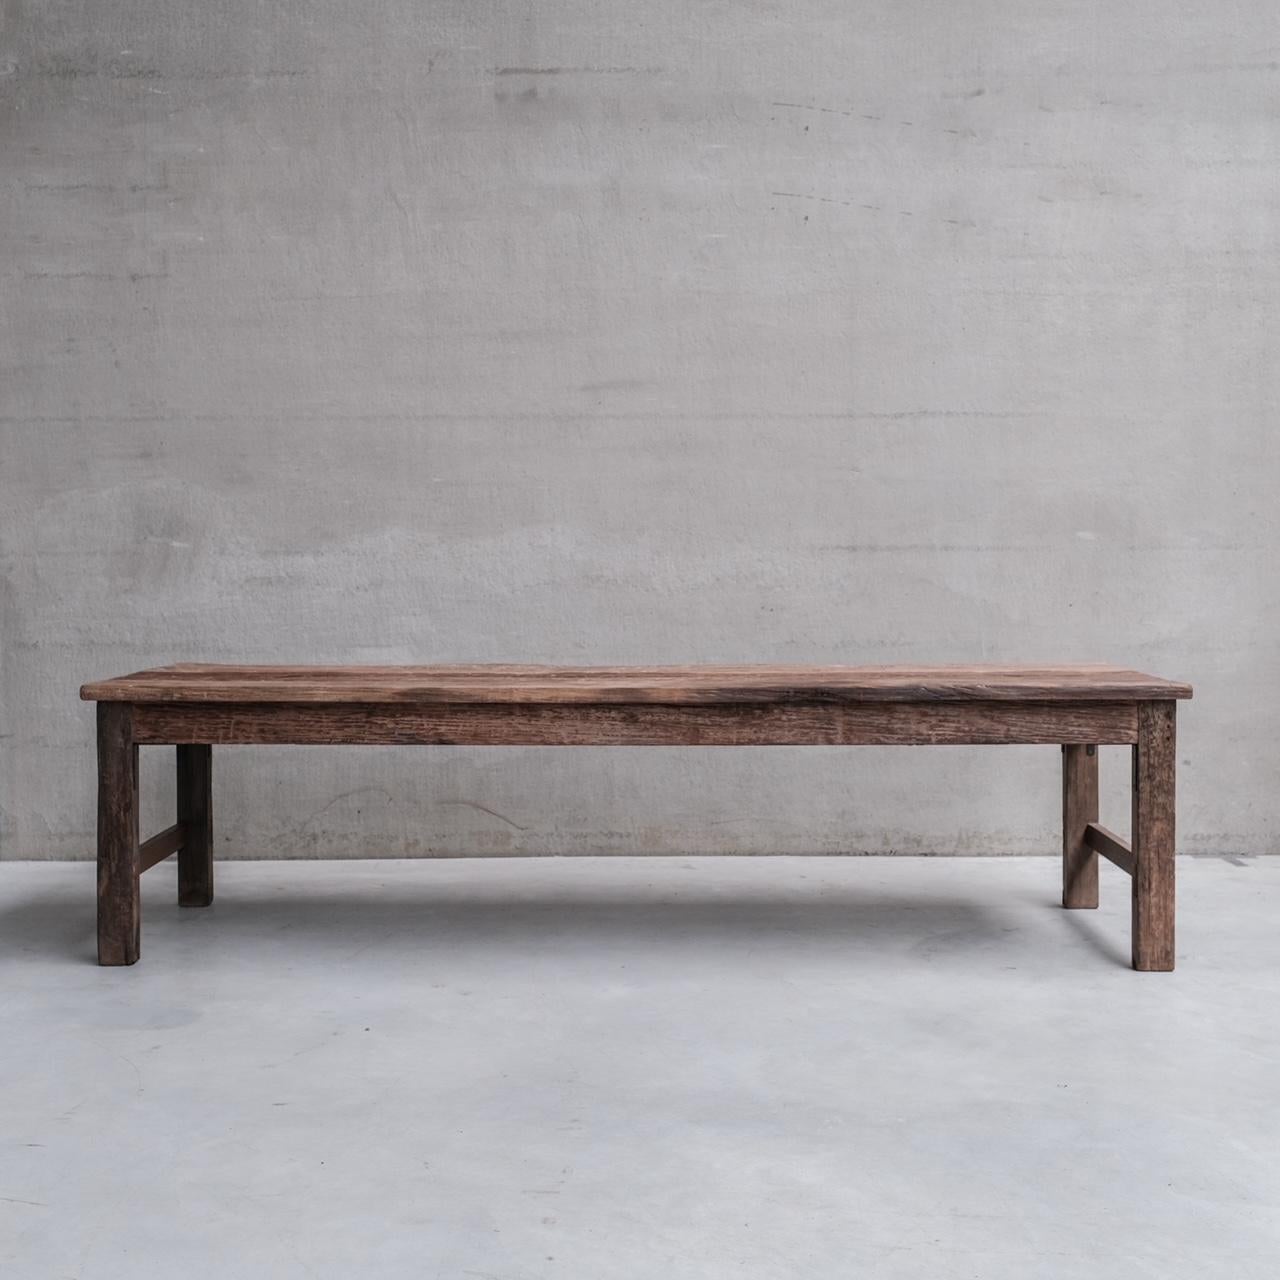 A large wooden dining table,

Belgium, c1950s.

Wabi-Sabi Esque full of natures imperfections.

Formed from reclaimed and antique wood, so hard to age precisely.

Internal ref: 27/12/23/002.

Good vintage condition, some scuffs and wear commensurate